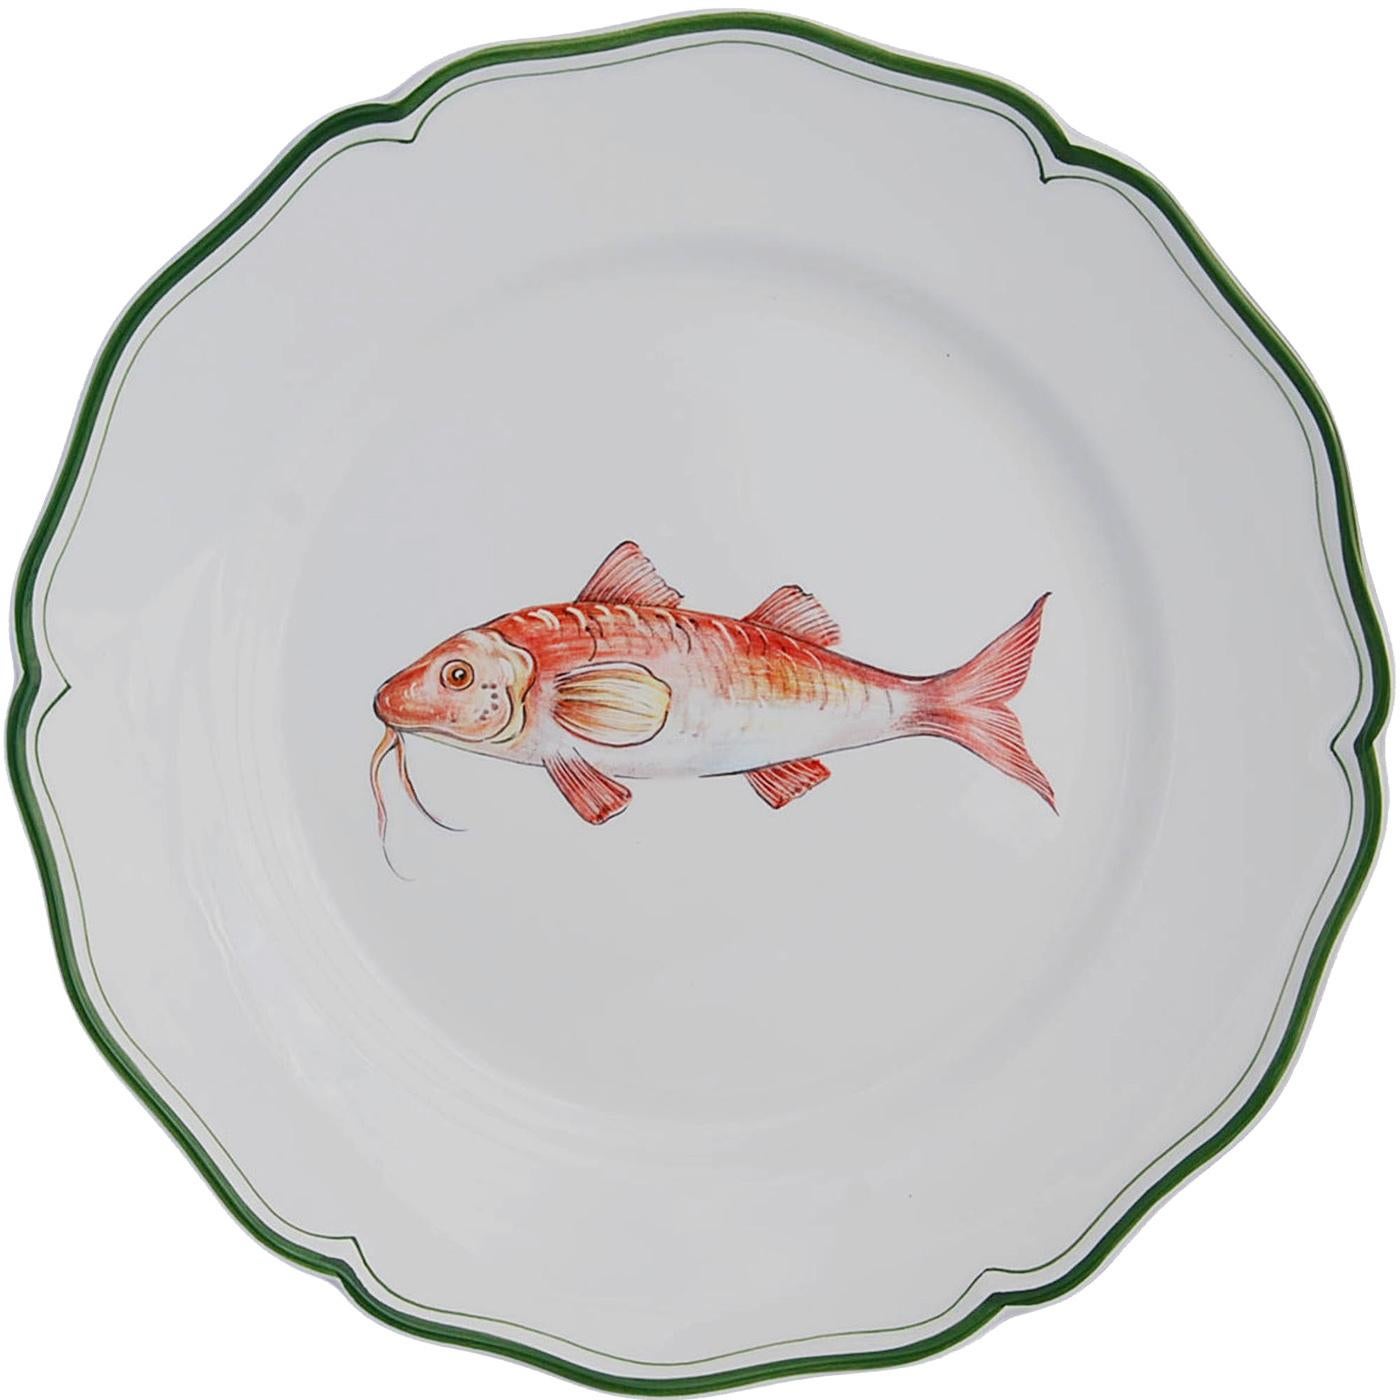 Mediterranean fish decorate with different designs each piece in this collection of 6 dinner ceramic plates. Este has been crafting hand-painted earthenware building on a tradition dating back to the 15th century, but is now discovering new